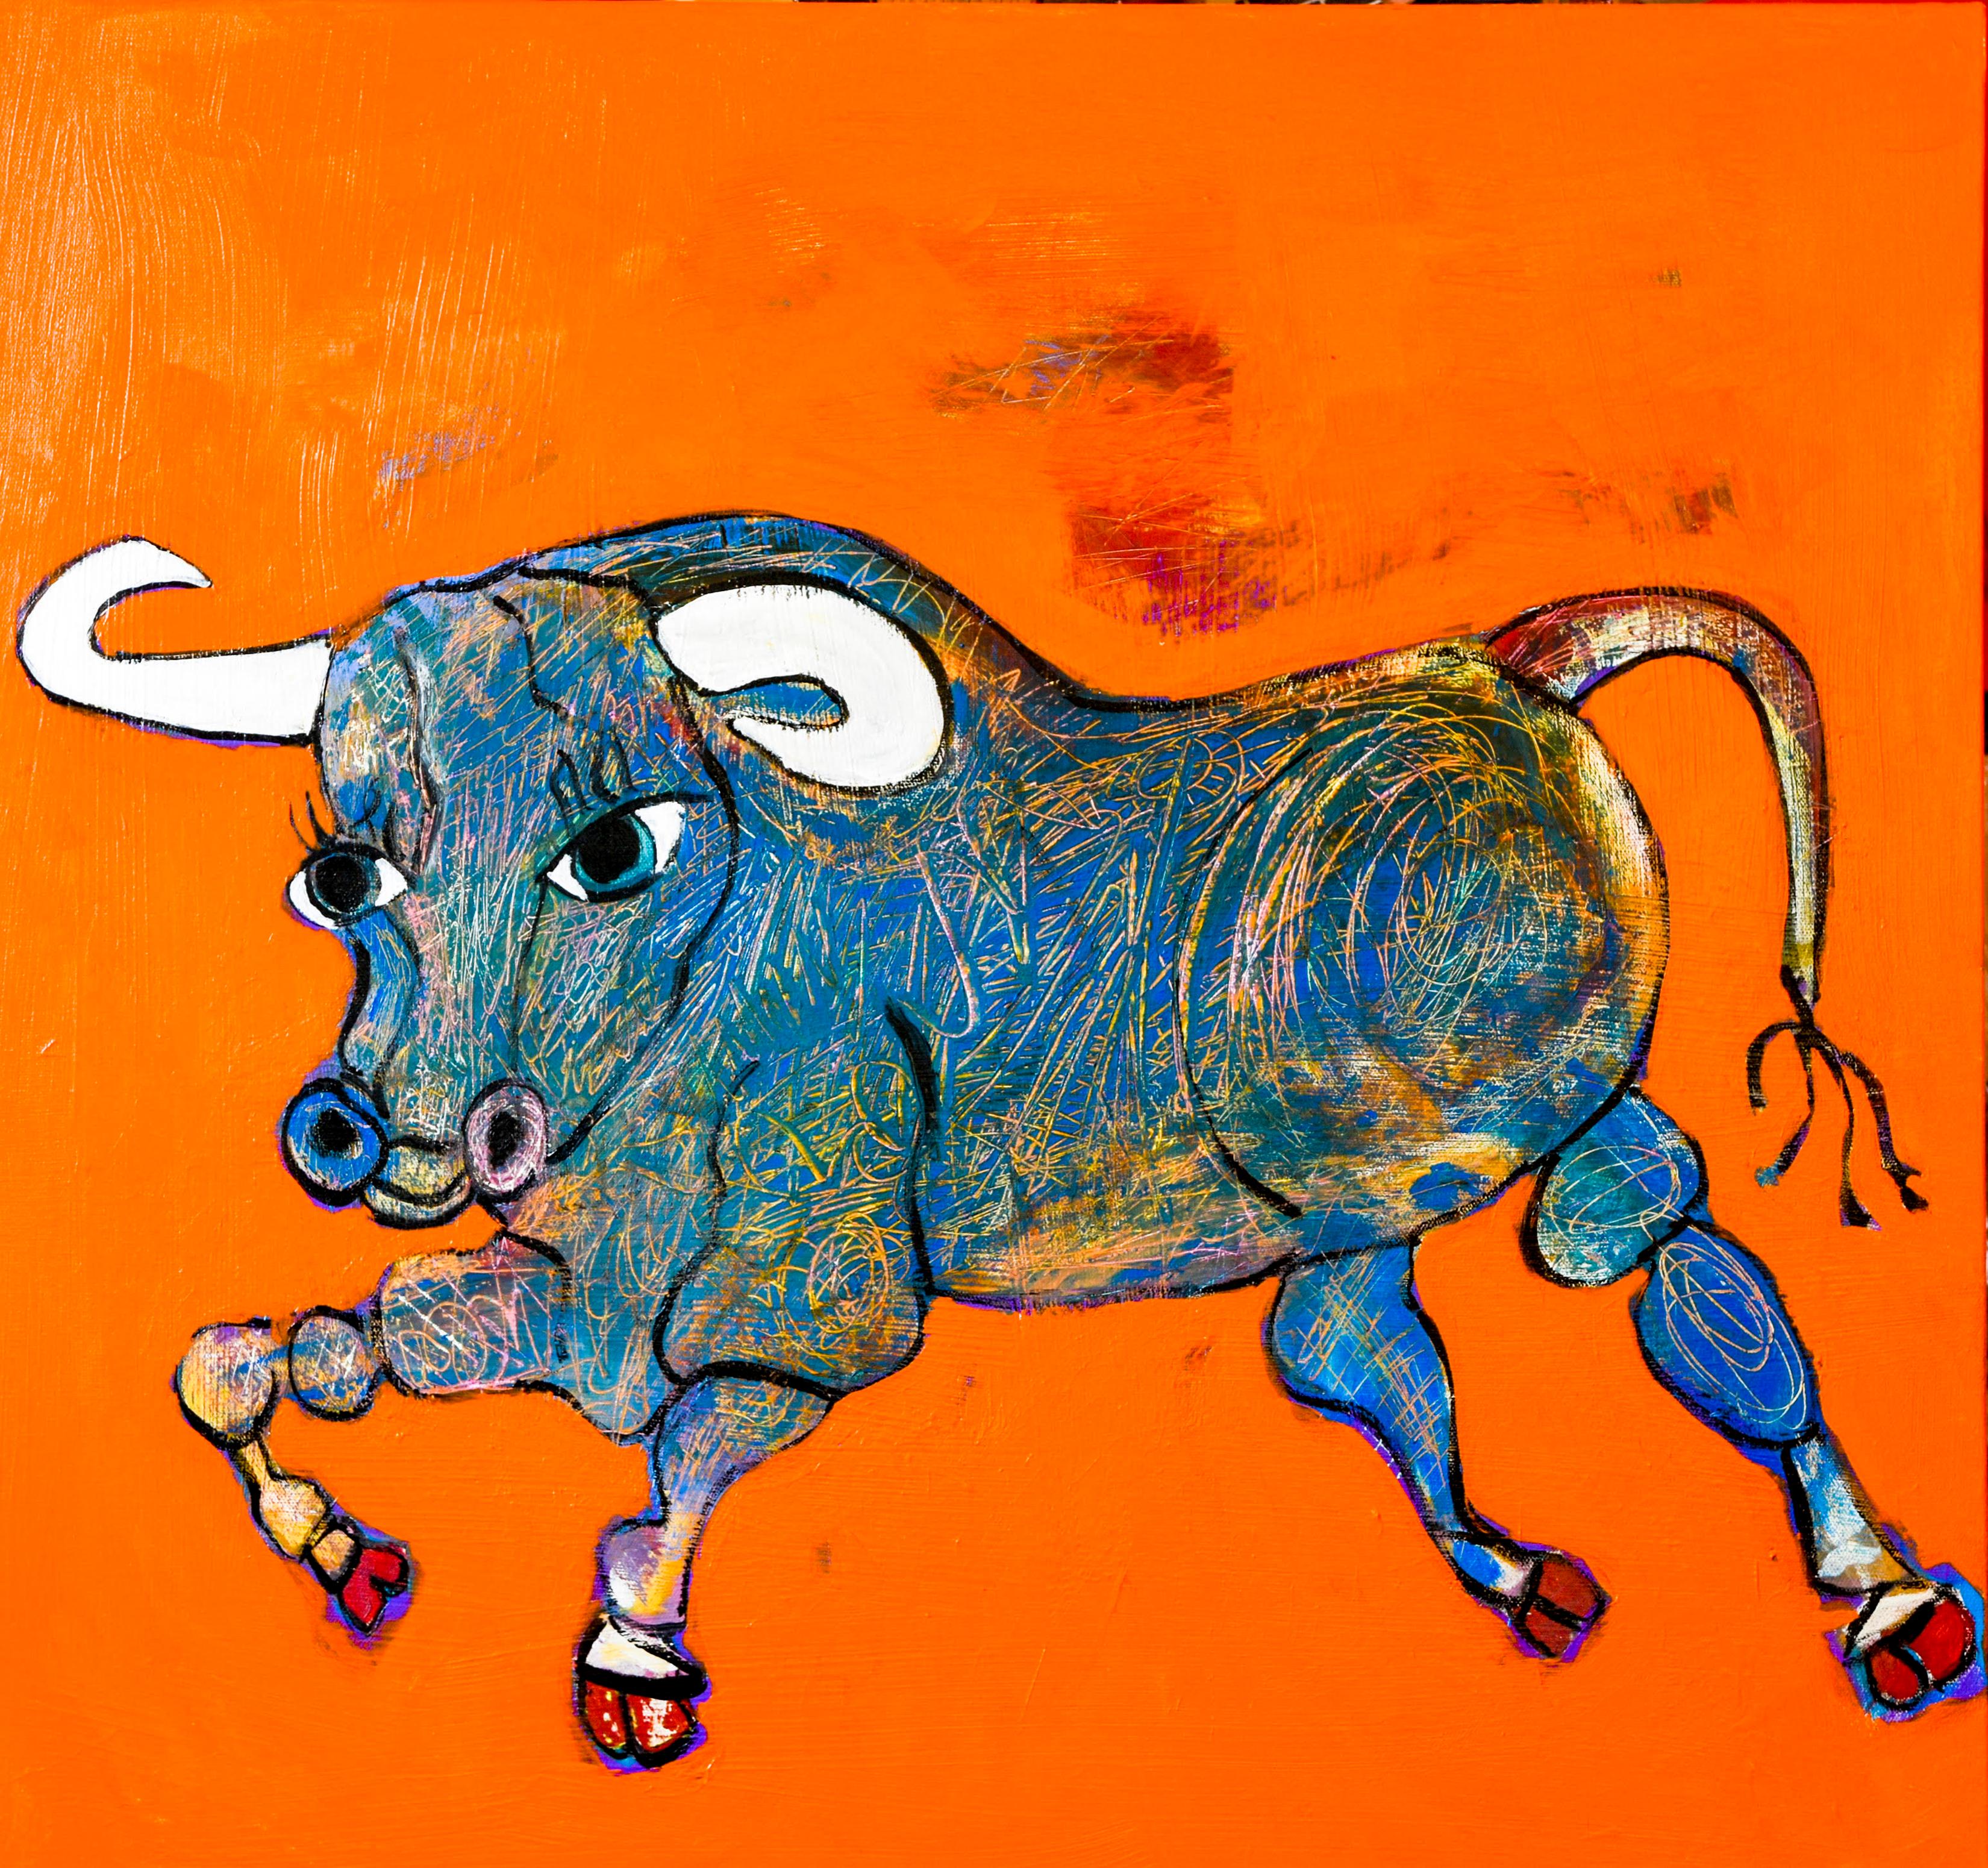 Melinda McLeod Animal Painting - "Quinto The Bull"-Acrylic Painting on Canvas 